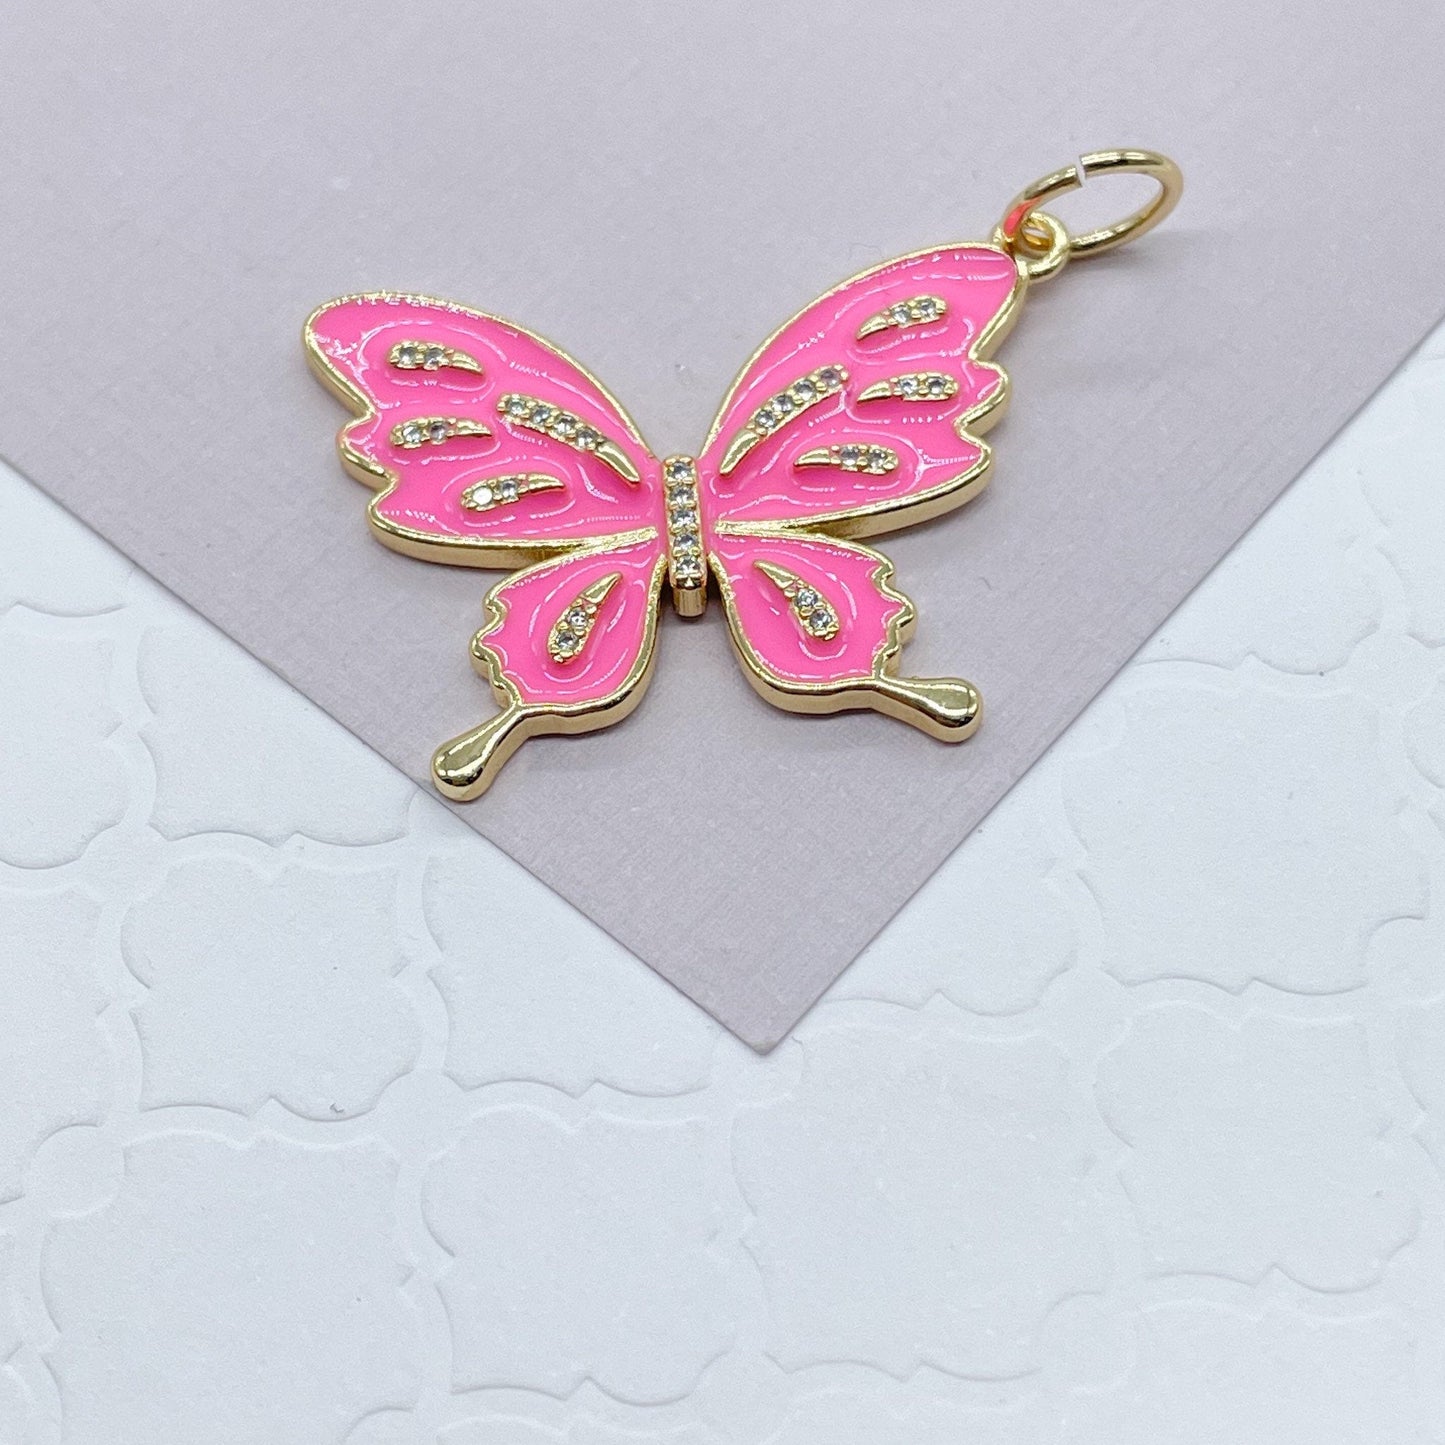 18k Gold Layered Colorful Butterfly Enamel Pendant Wholesale Charm Jewelry Making